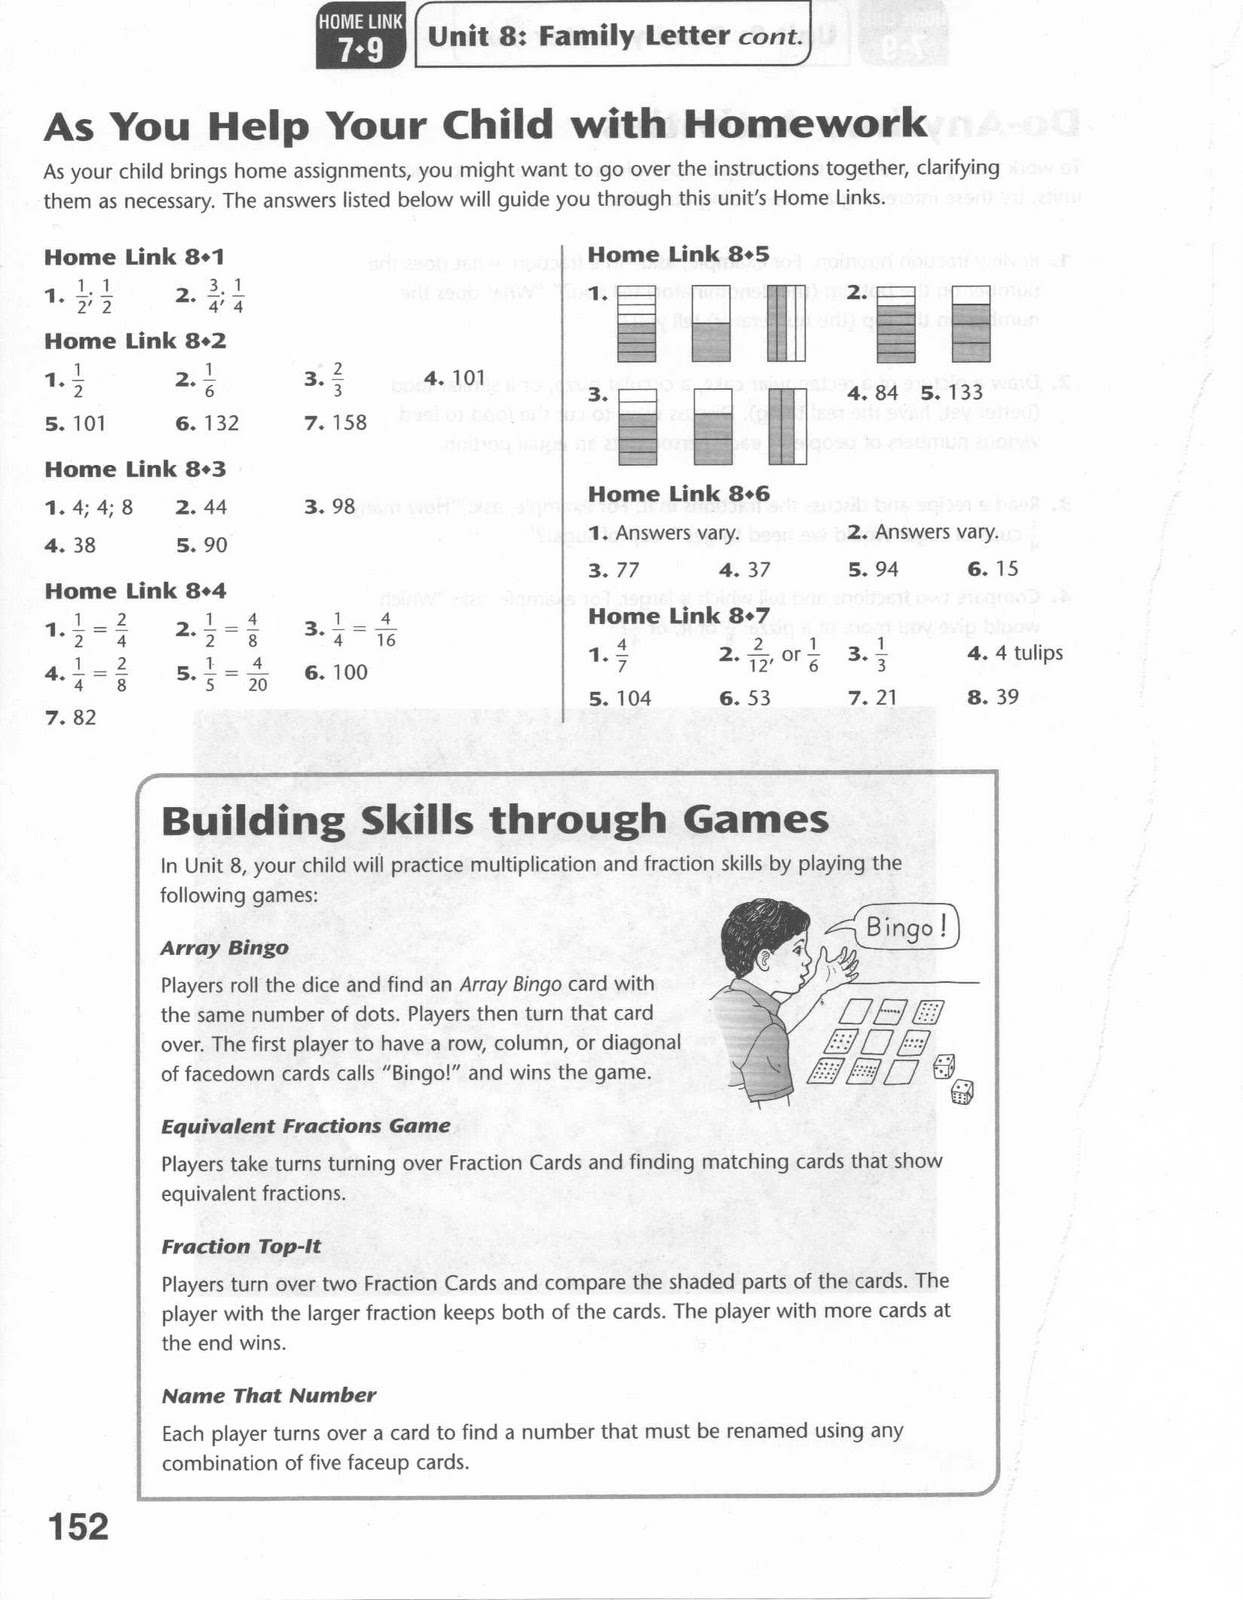 13-best-images-of-did-you-hear-about-math-worksheet-answer-key-did-you-hear-about-math